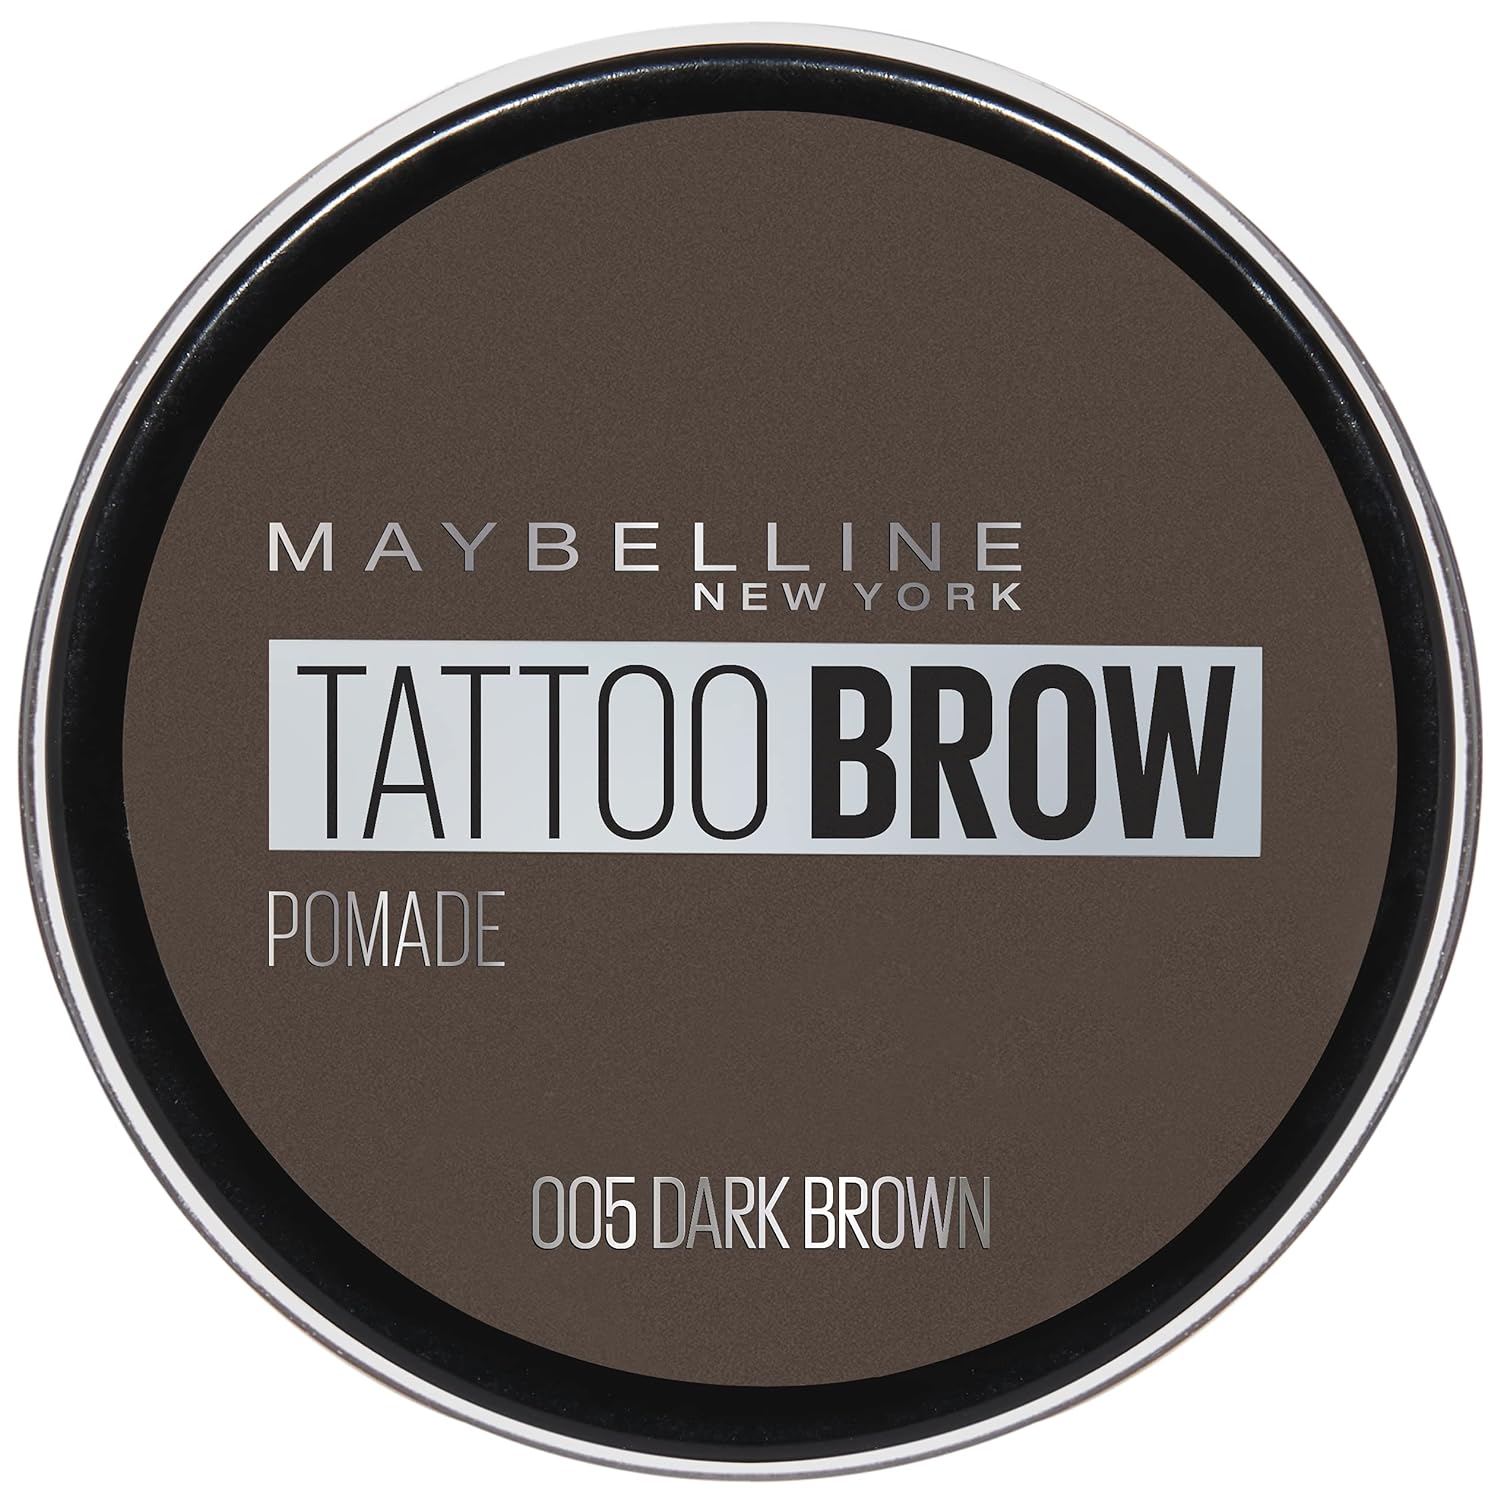 ''Maybelline TATTOO Brow Longlasting Pomade Pot, Dark Brown, 5 g, Pack Of 1''